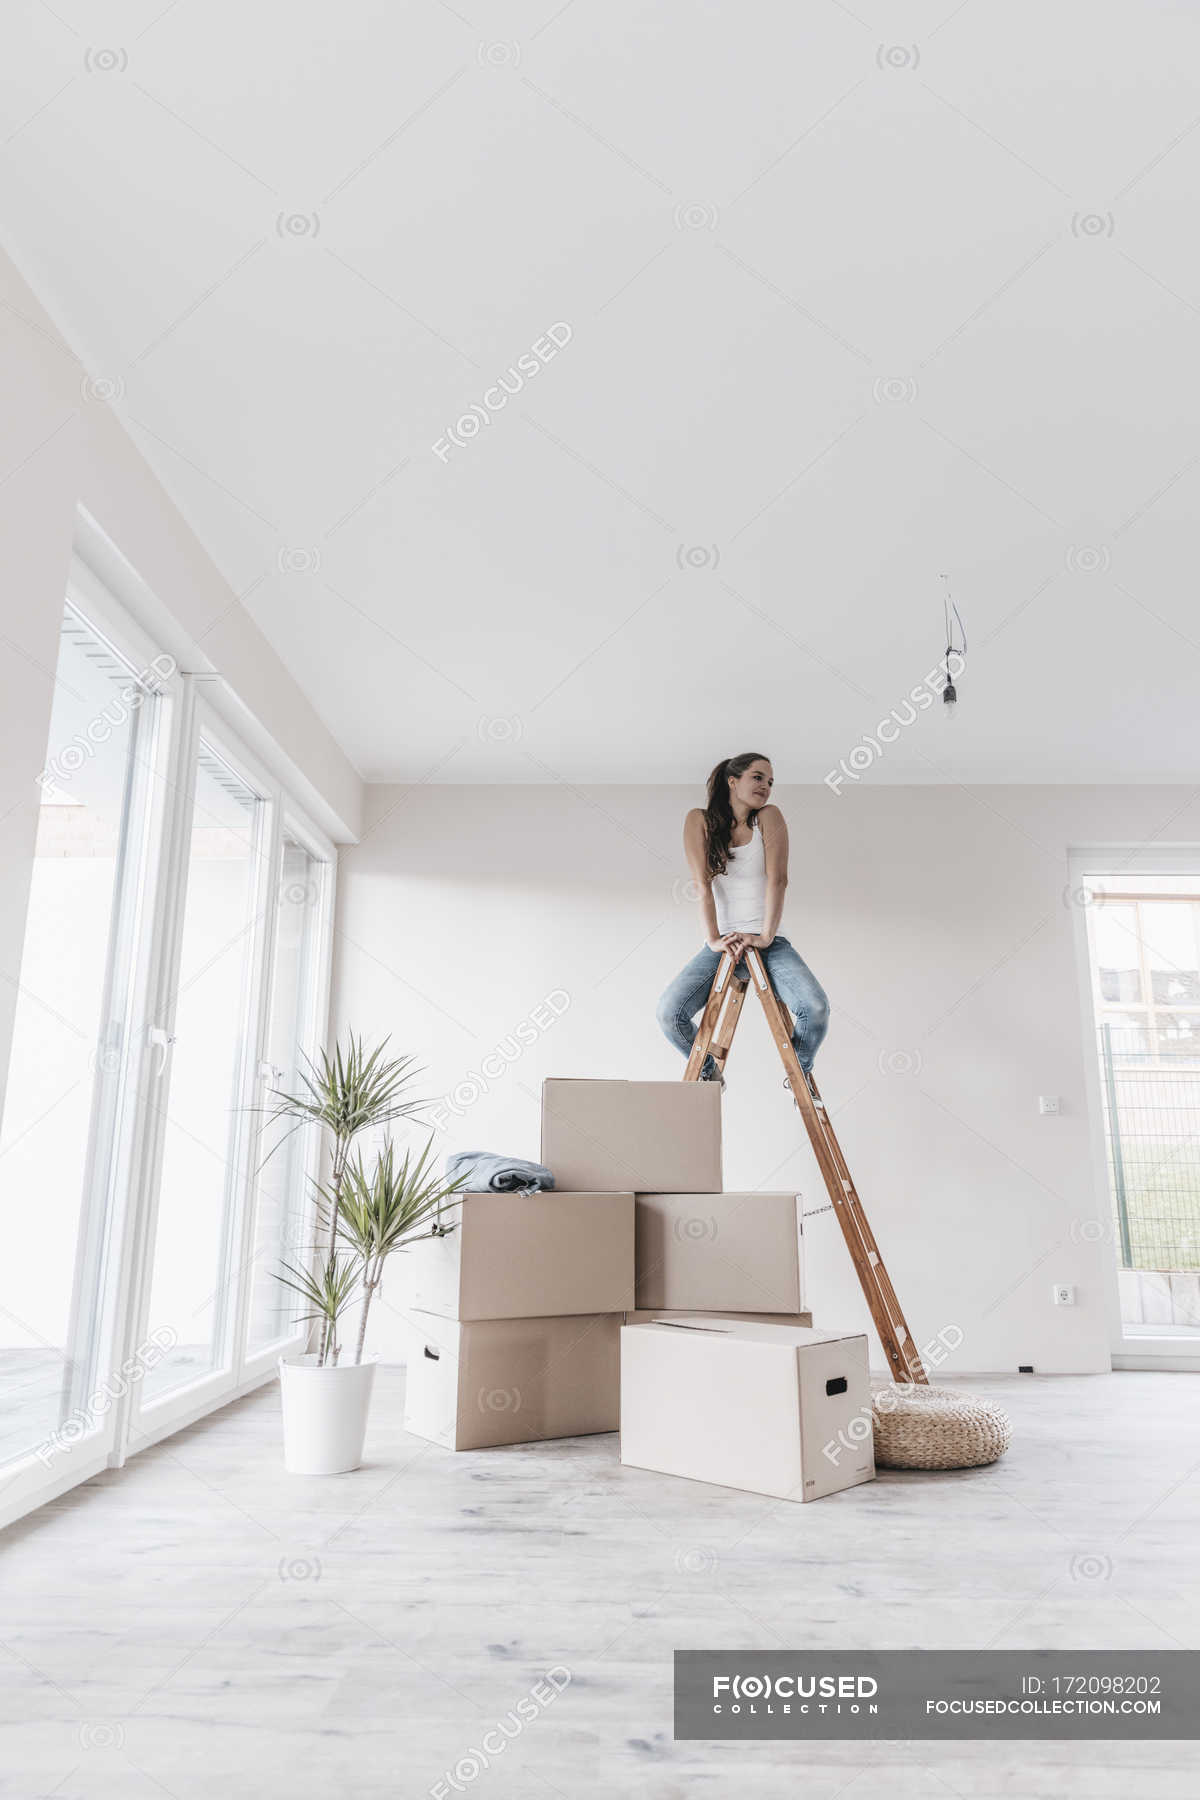 Mature woman sitting on ladder in new home — Stock Photo | #172098202